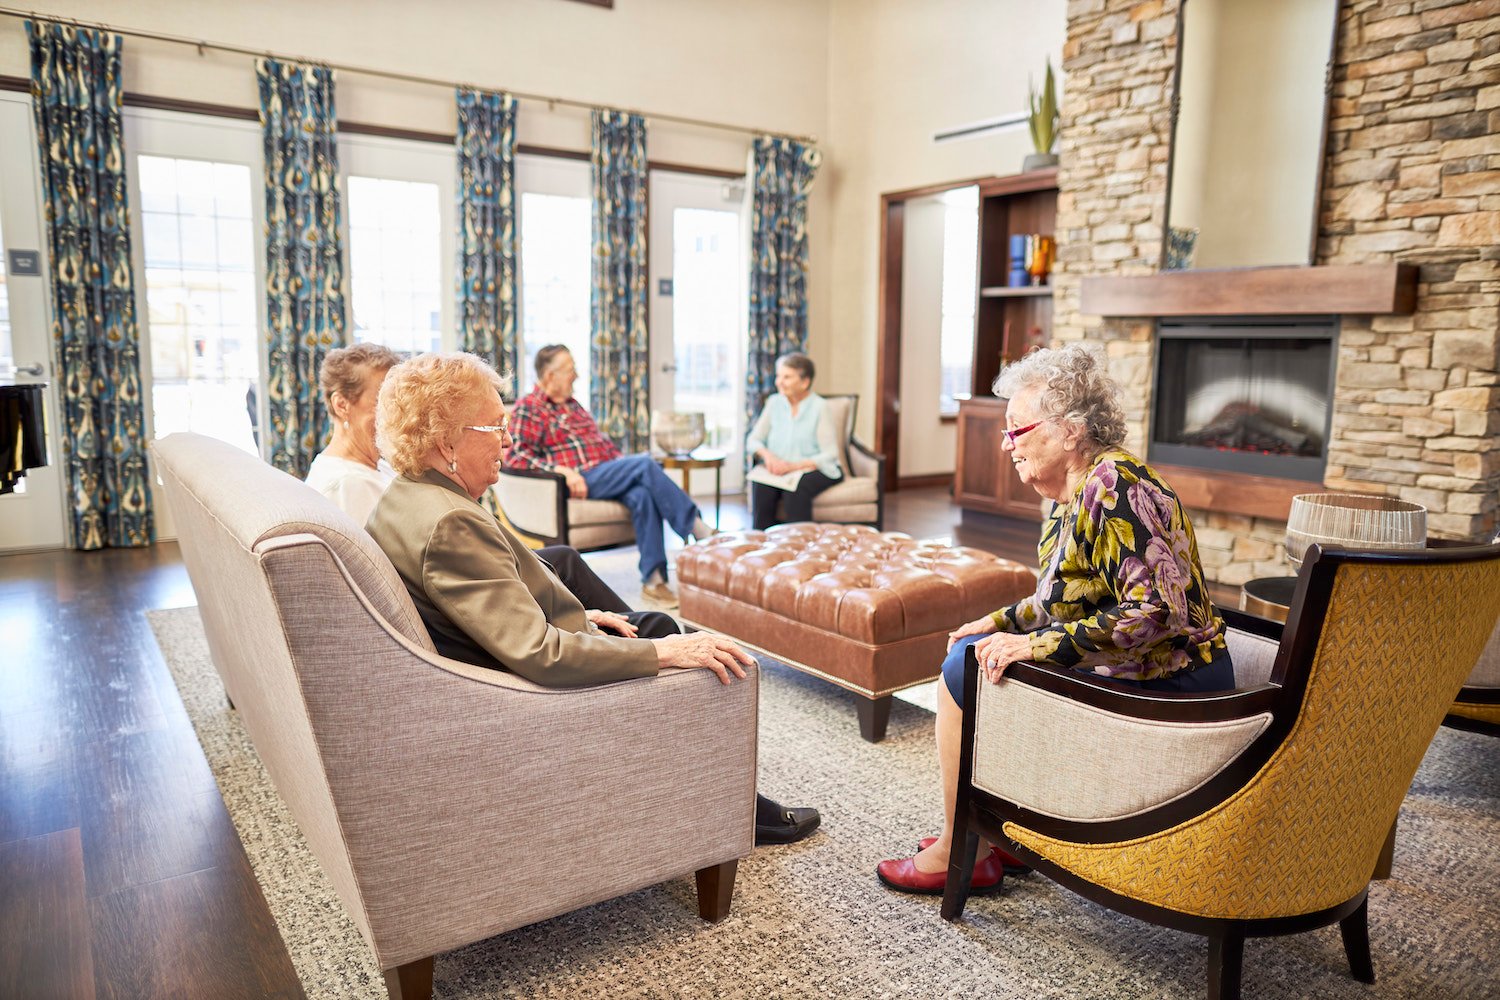 Residents spending time in a living room together